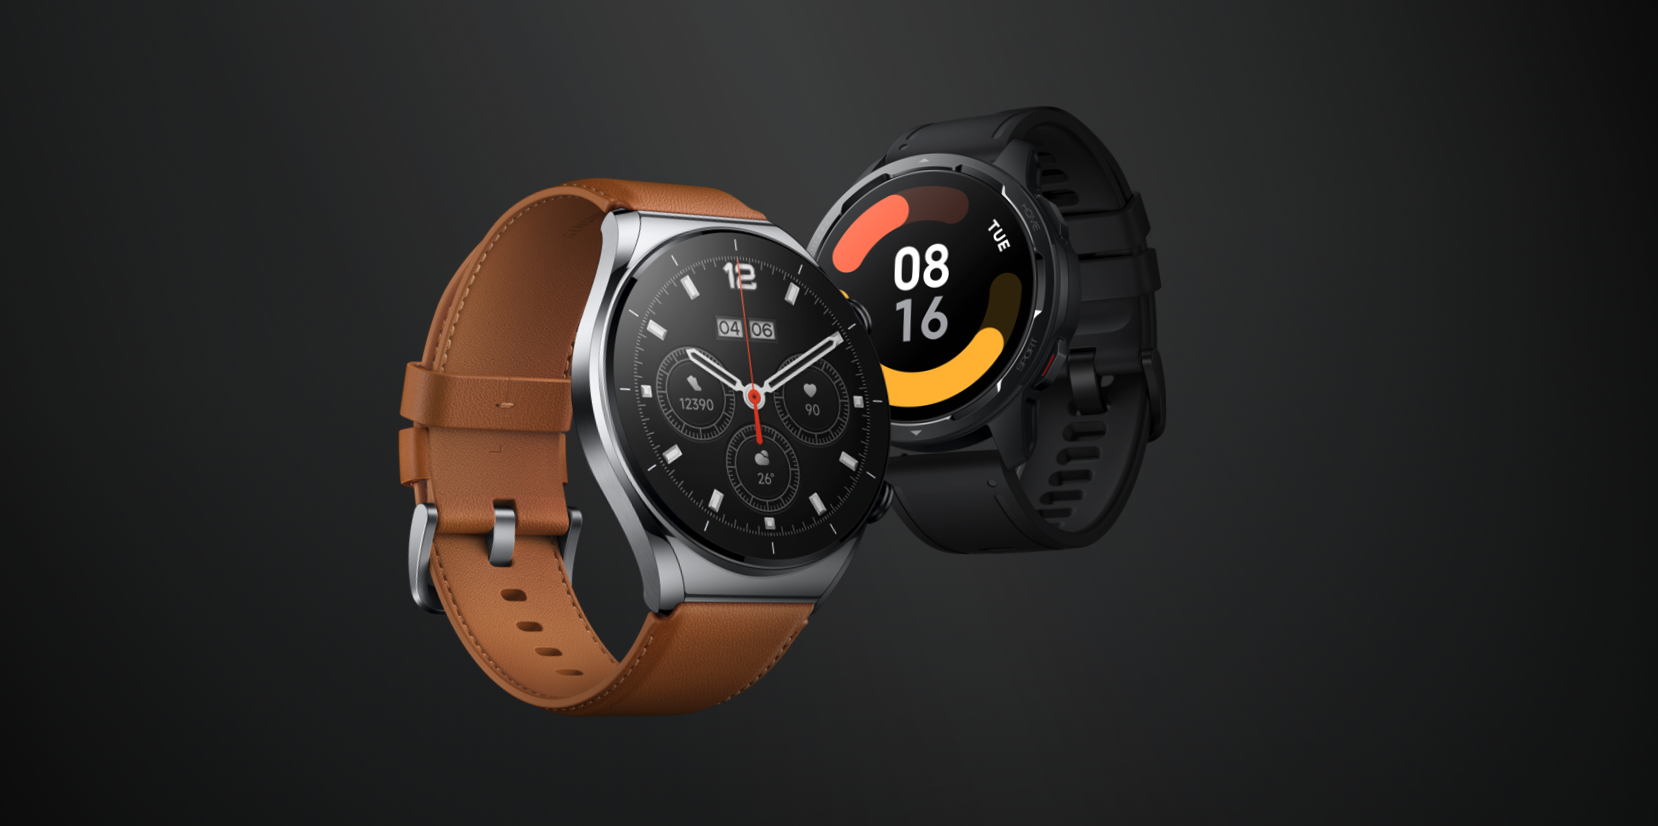 Xiaomi Mi Watch Color Sports Edition adds more hues with familiar